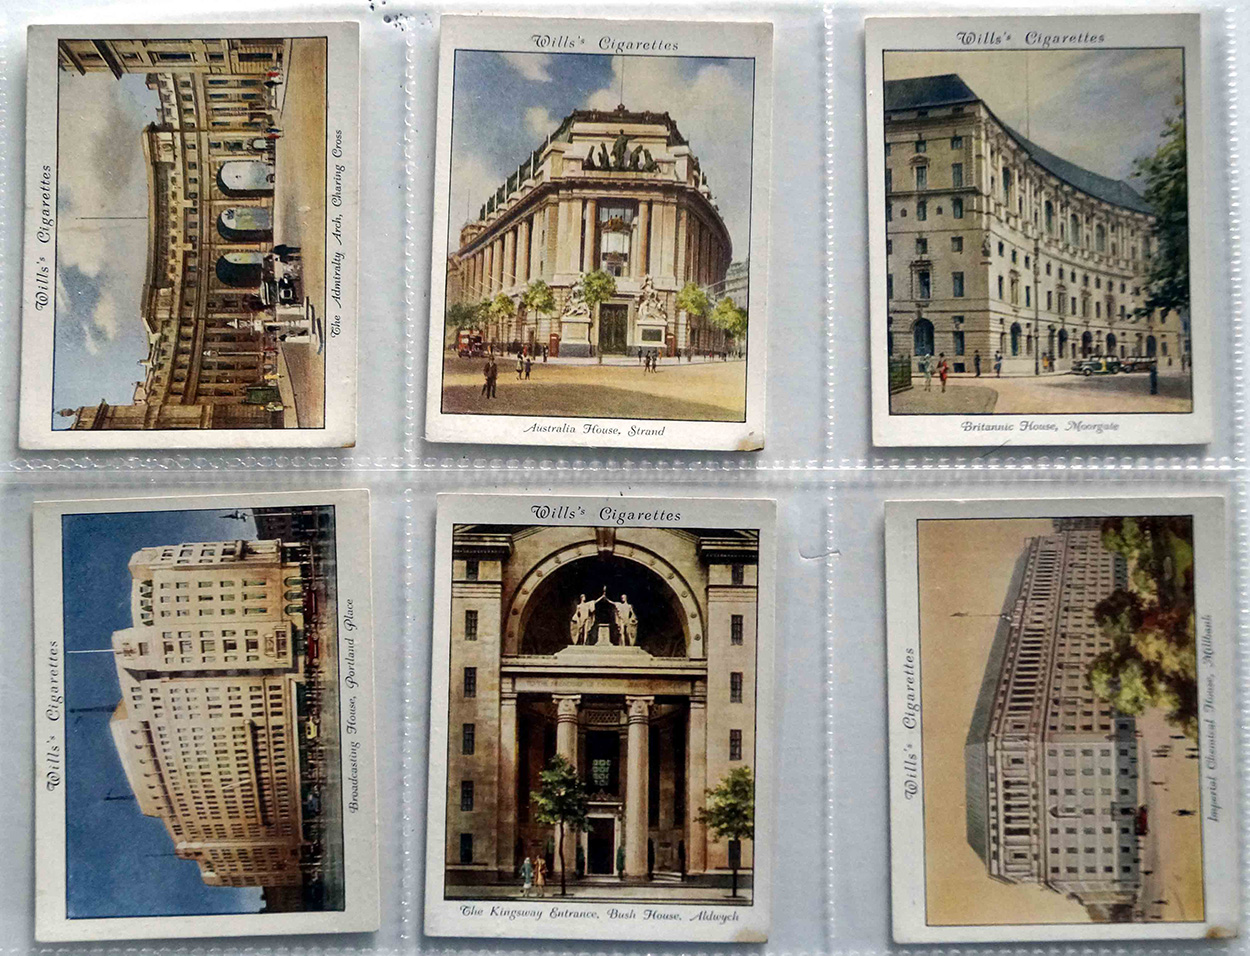 Full Set of 25 Cigarette Cards: Modern Architecture (1931) art by Architecture at The Illustration Art Gallery